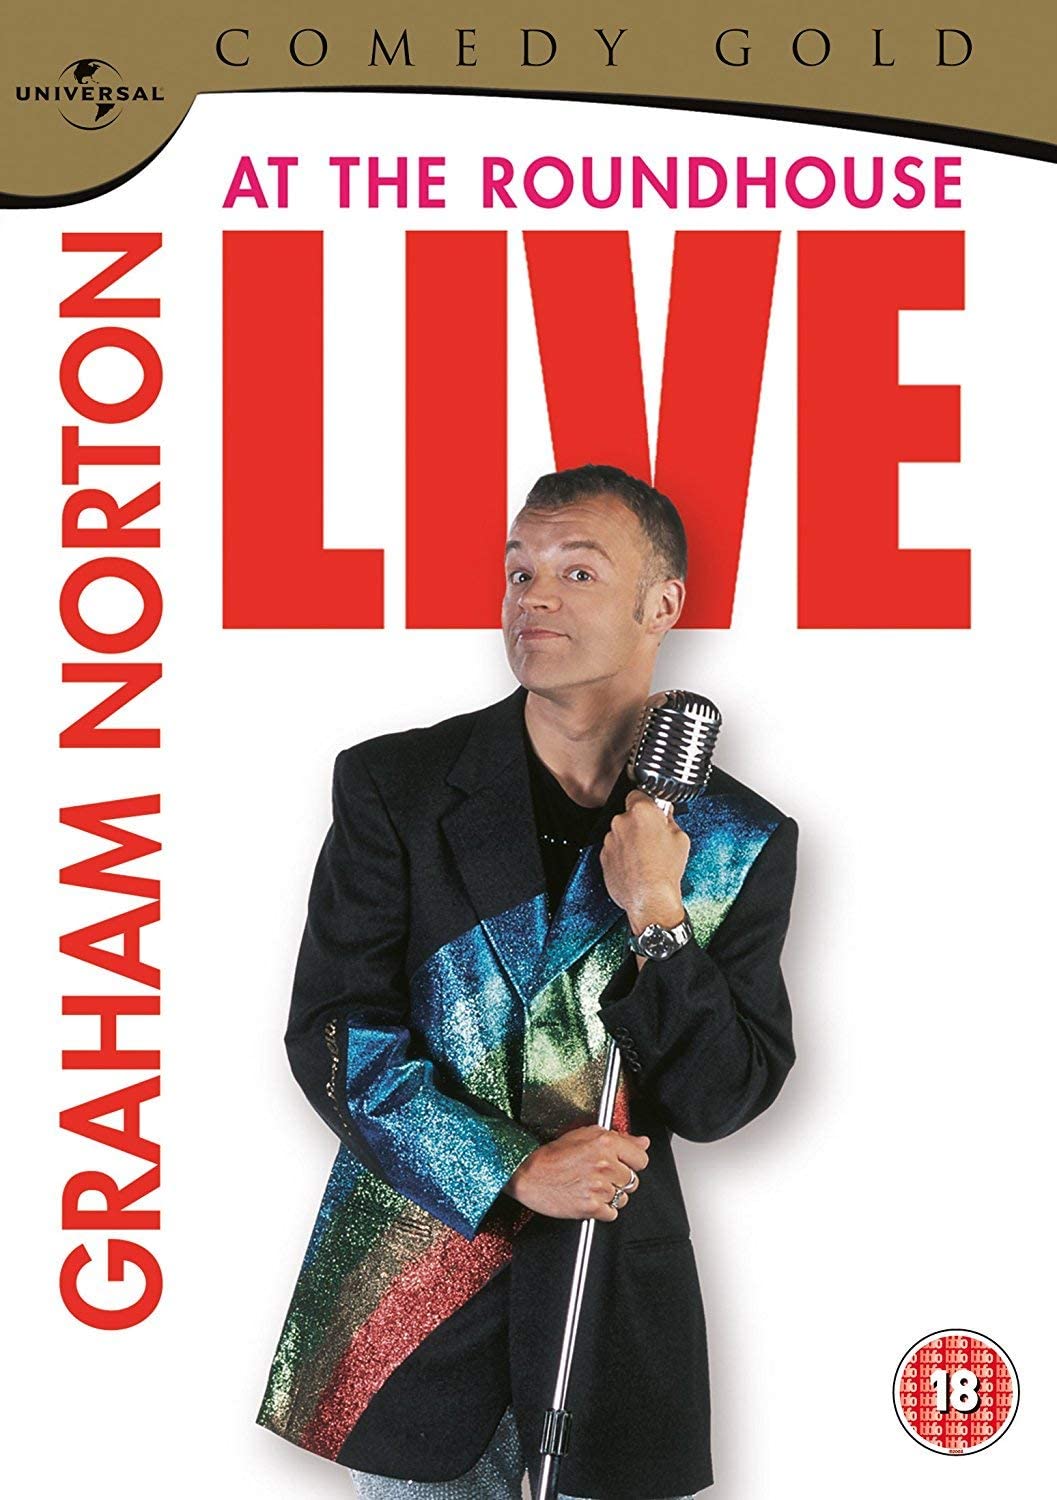 Graham Norton - Live At The Roundhouse - Comedy Gold 2010 - Comedy [DVD]